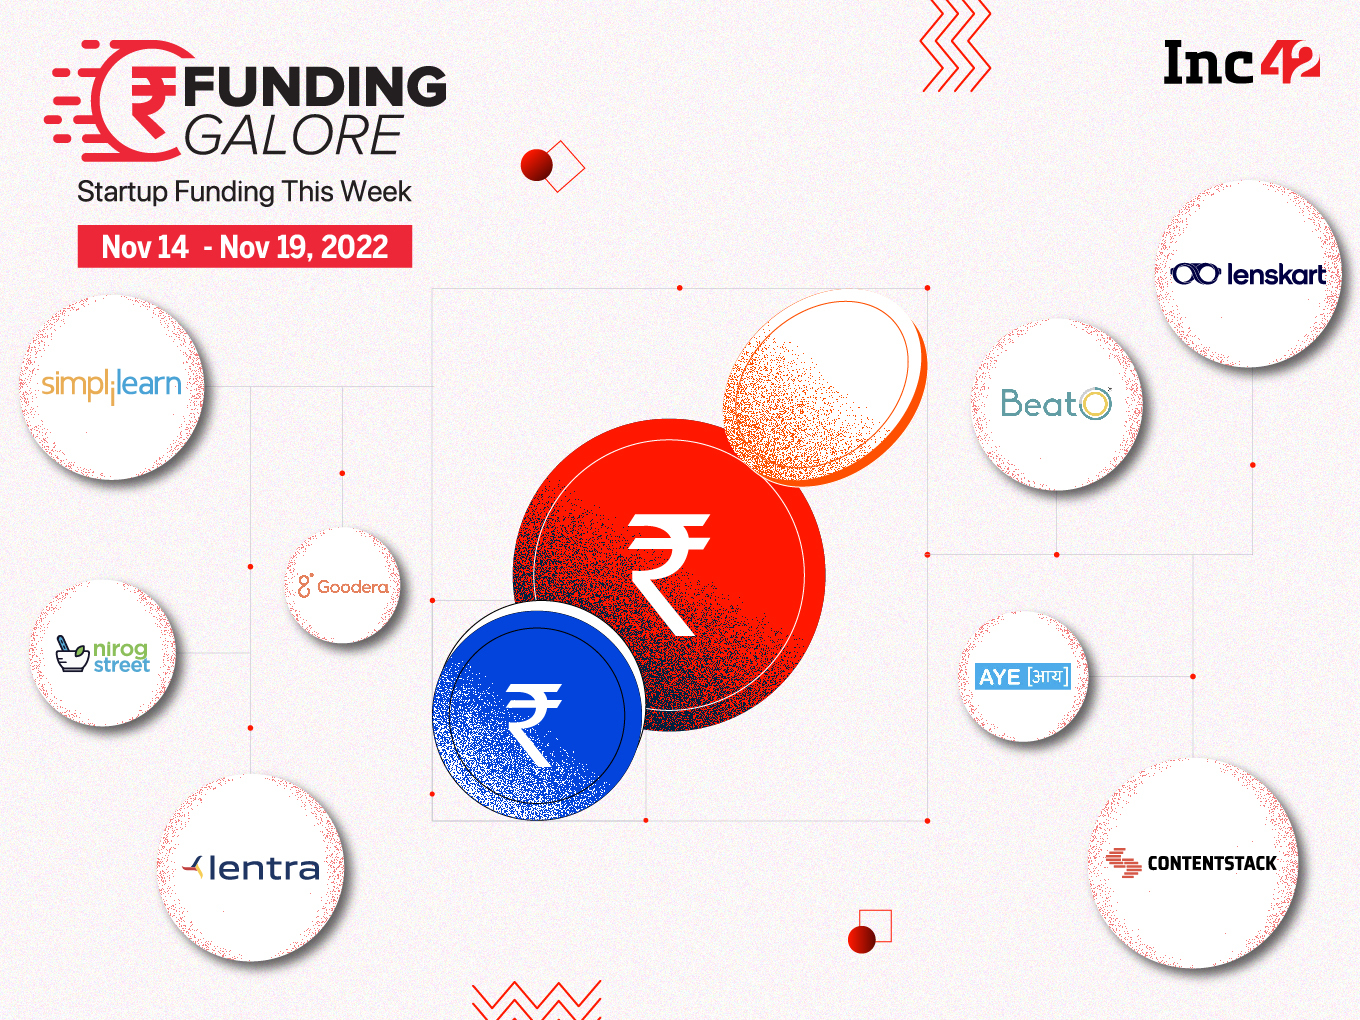 [Funding Galore] From Contentstack To Lenskart —$344 Mn Raised By Indian Startups This Week